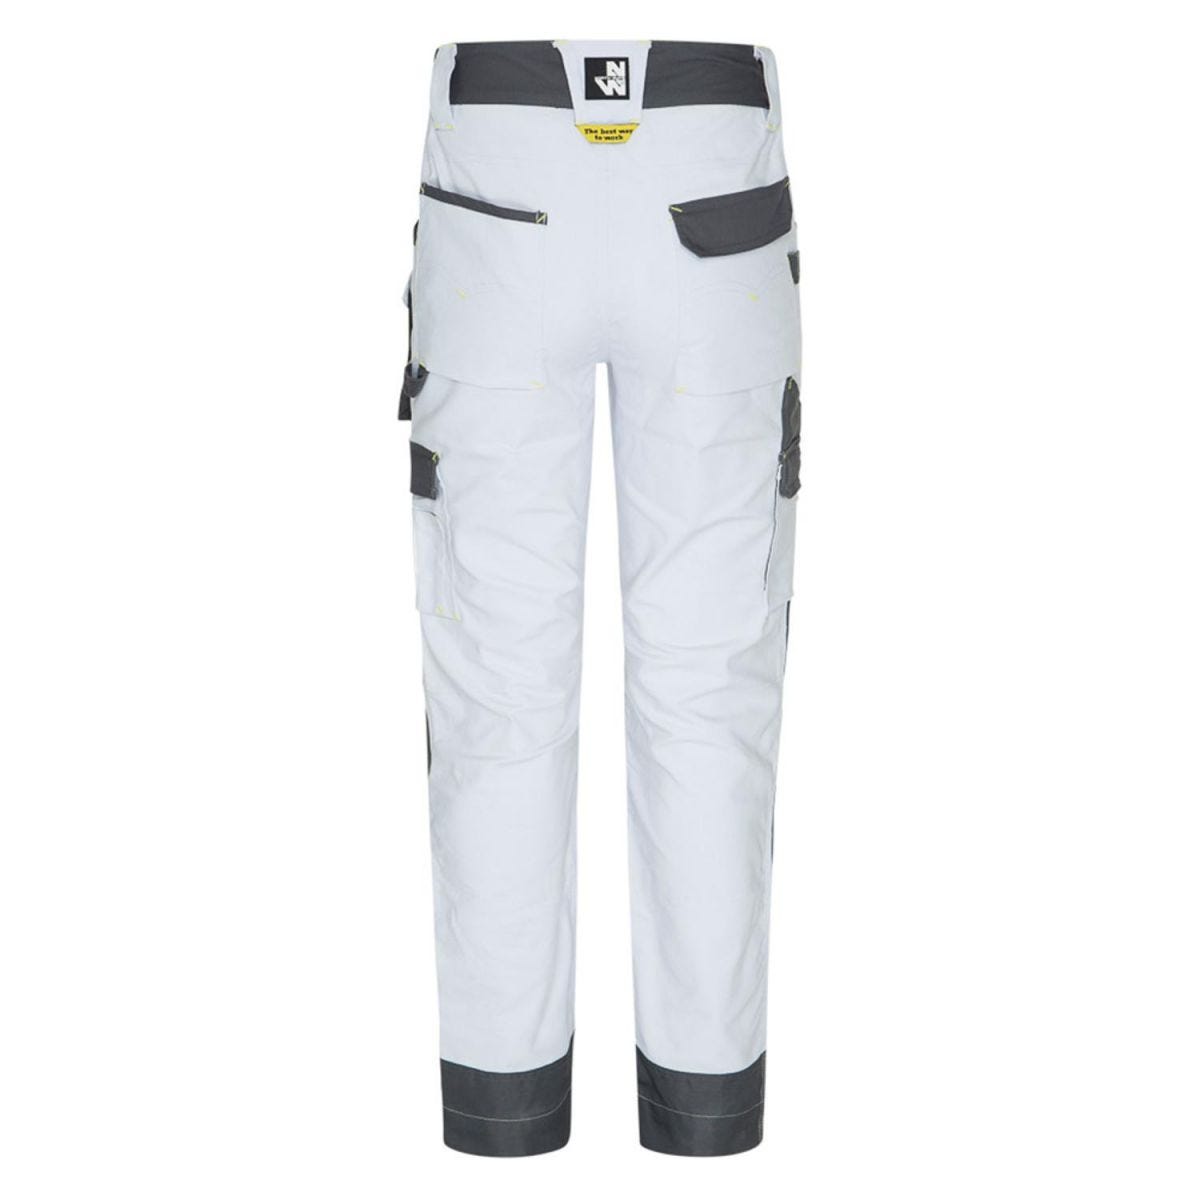 Pantalon de travail multipoches Cary blanc - North Ways - Taille 56 2